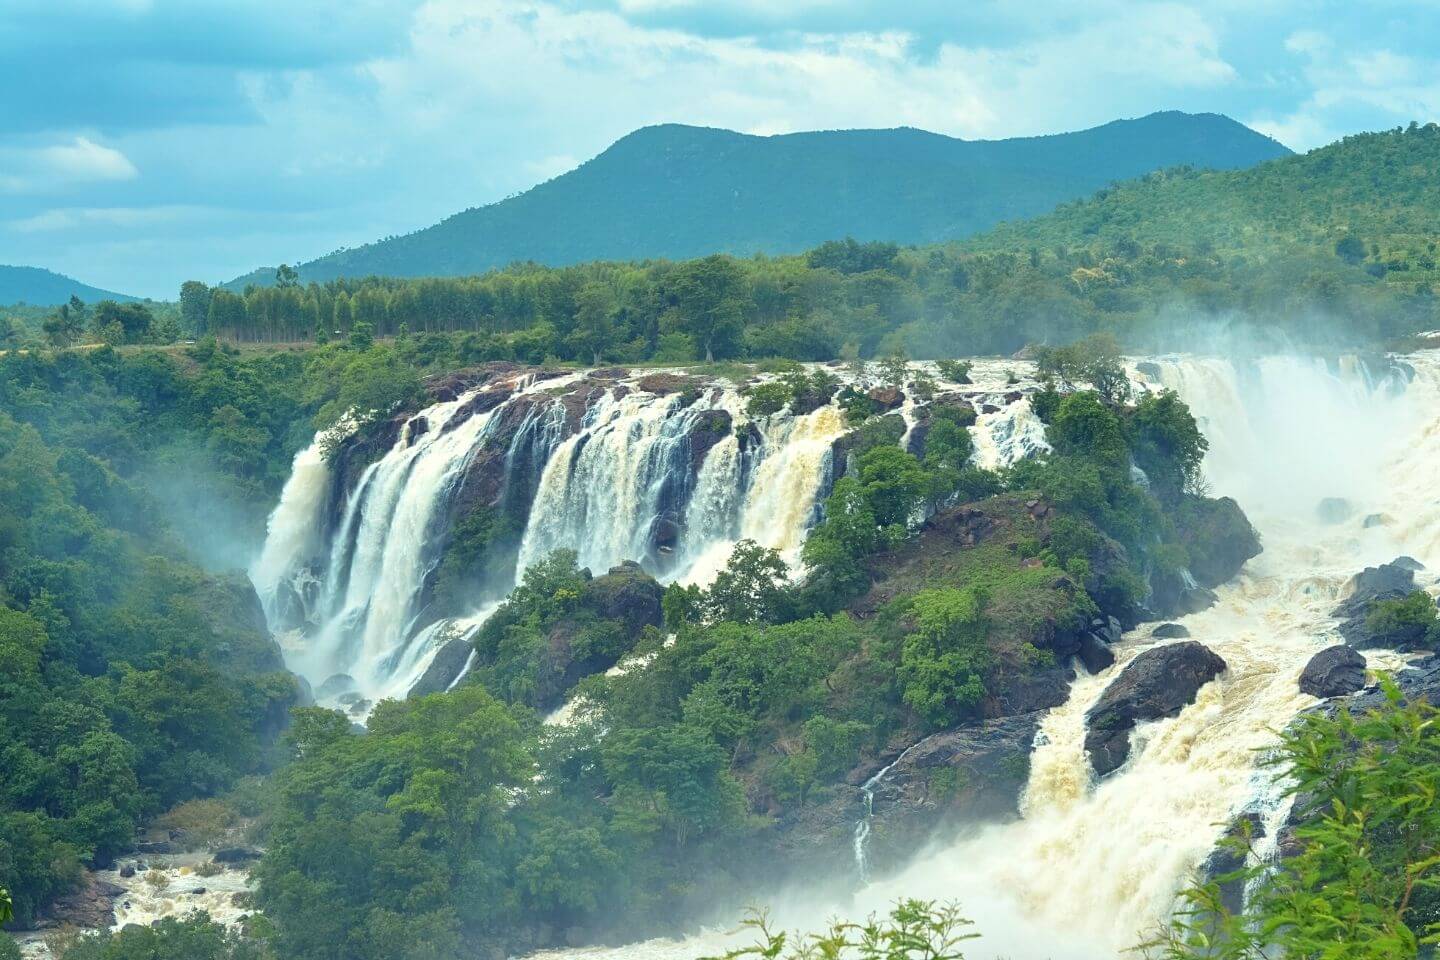 Gaganachukki and Bharachukki waterfalls Shivanasamudra are one some of the best falls to visit near Bangalore within 200 km for couples